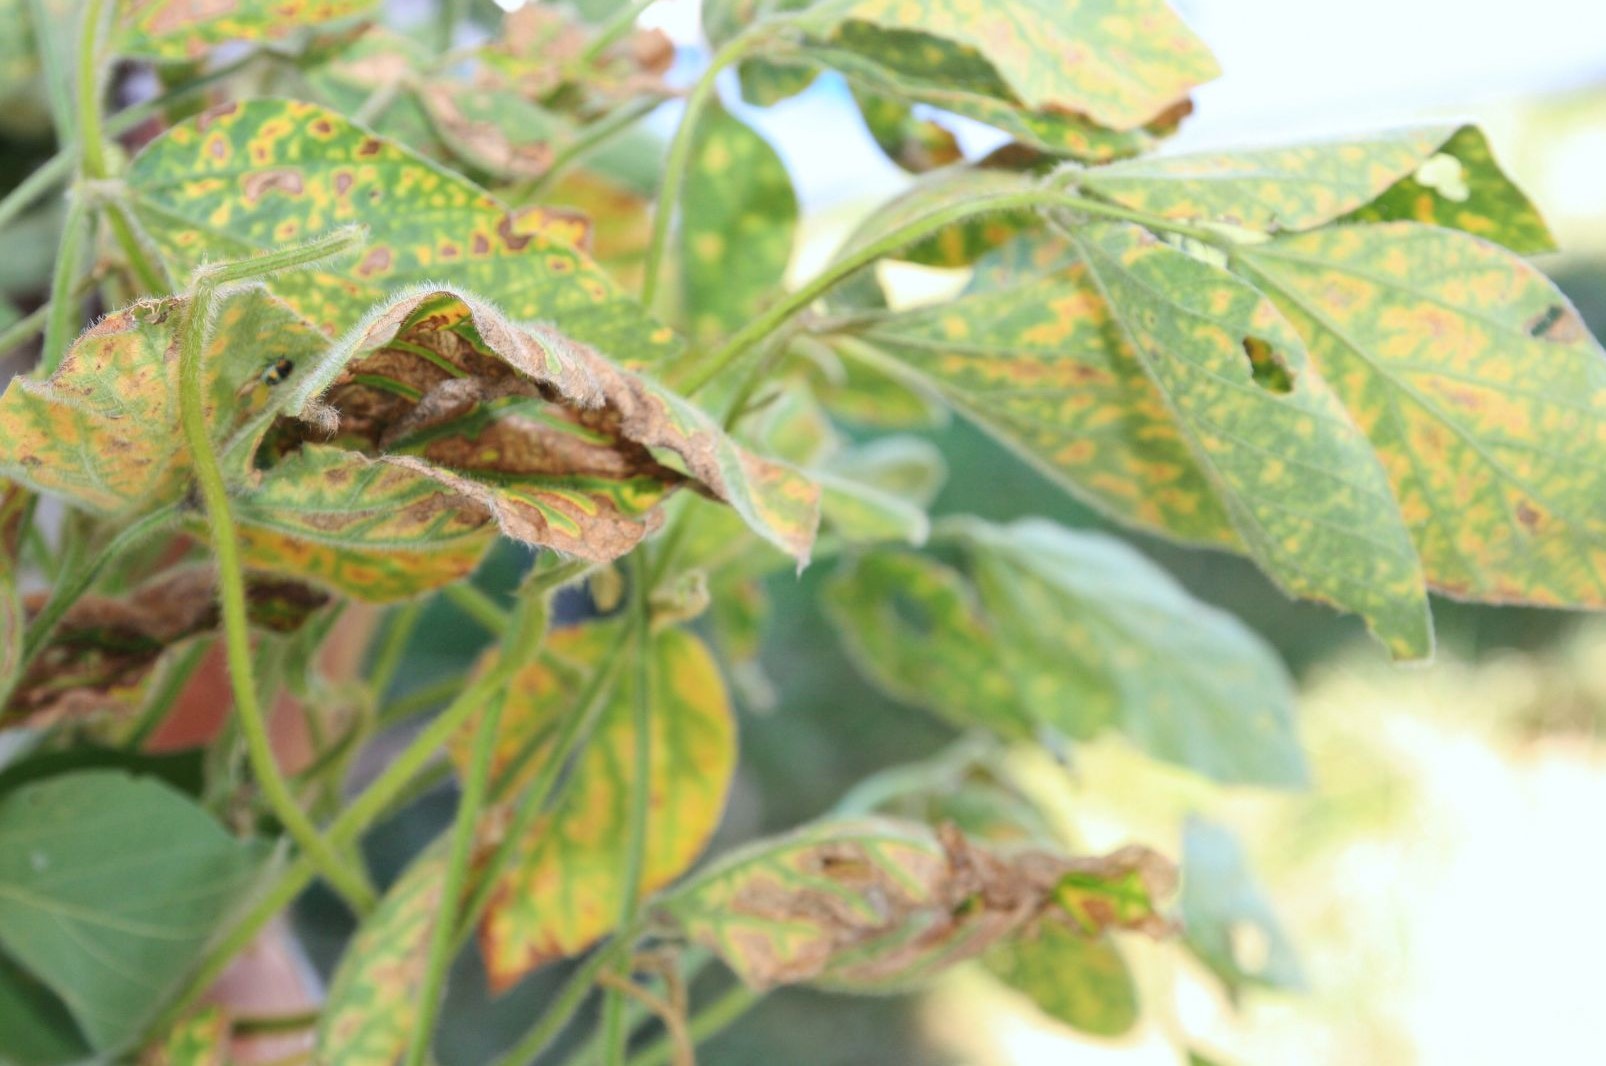 Sudden Death Syndrome in Soybean